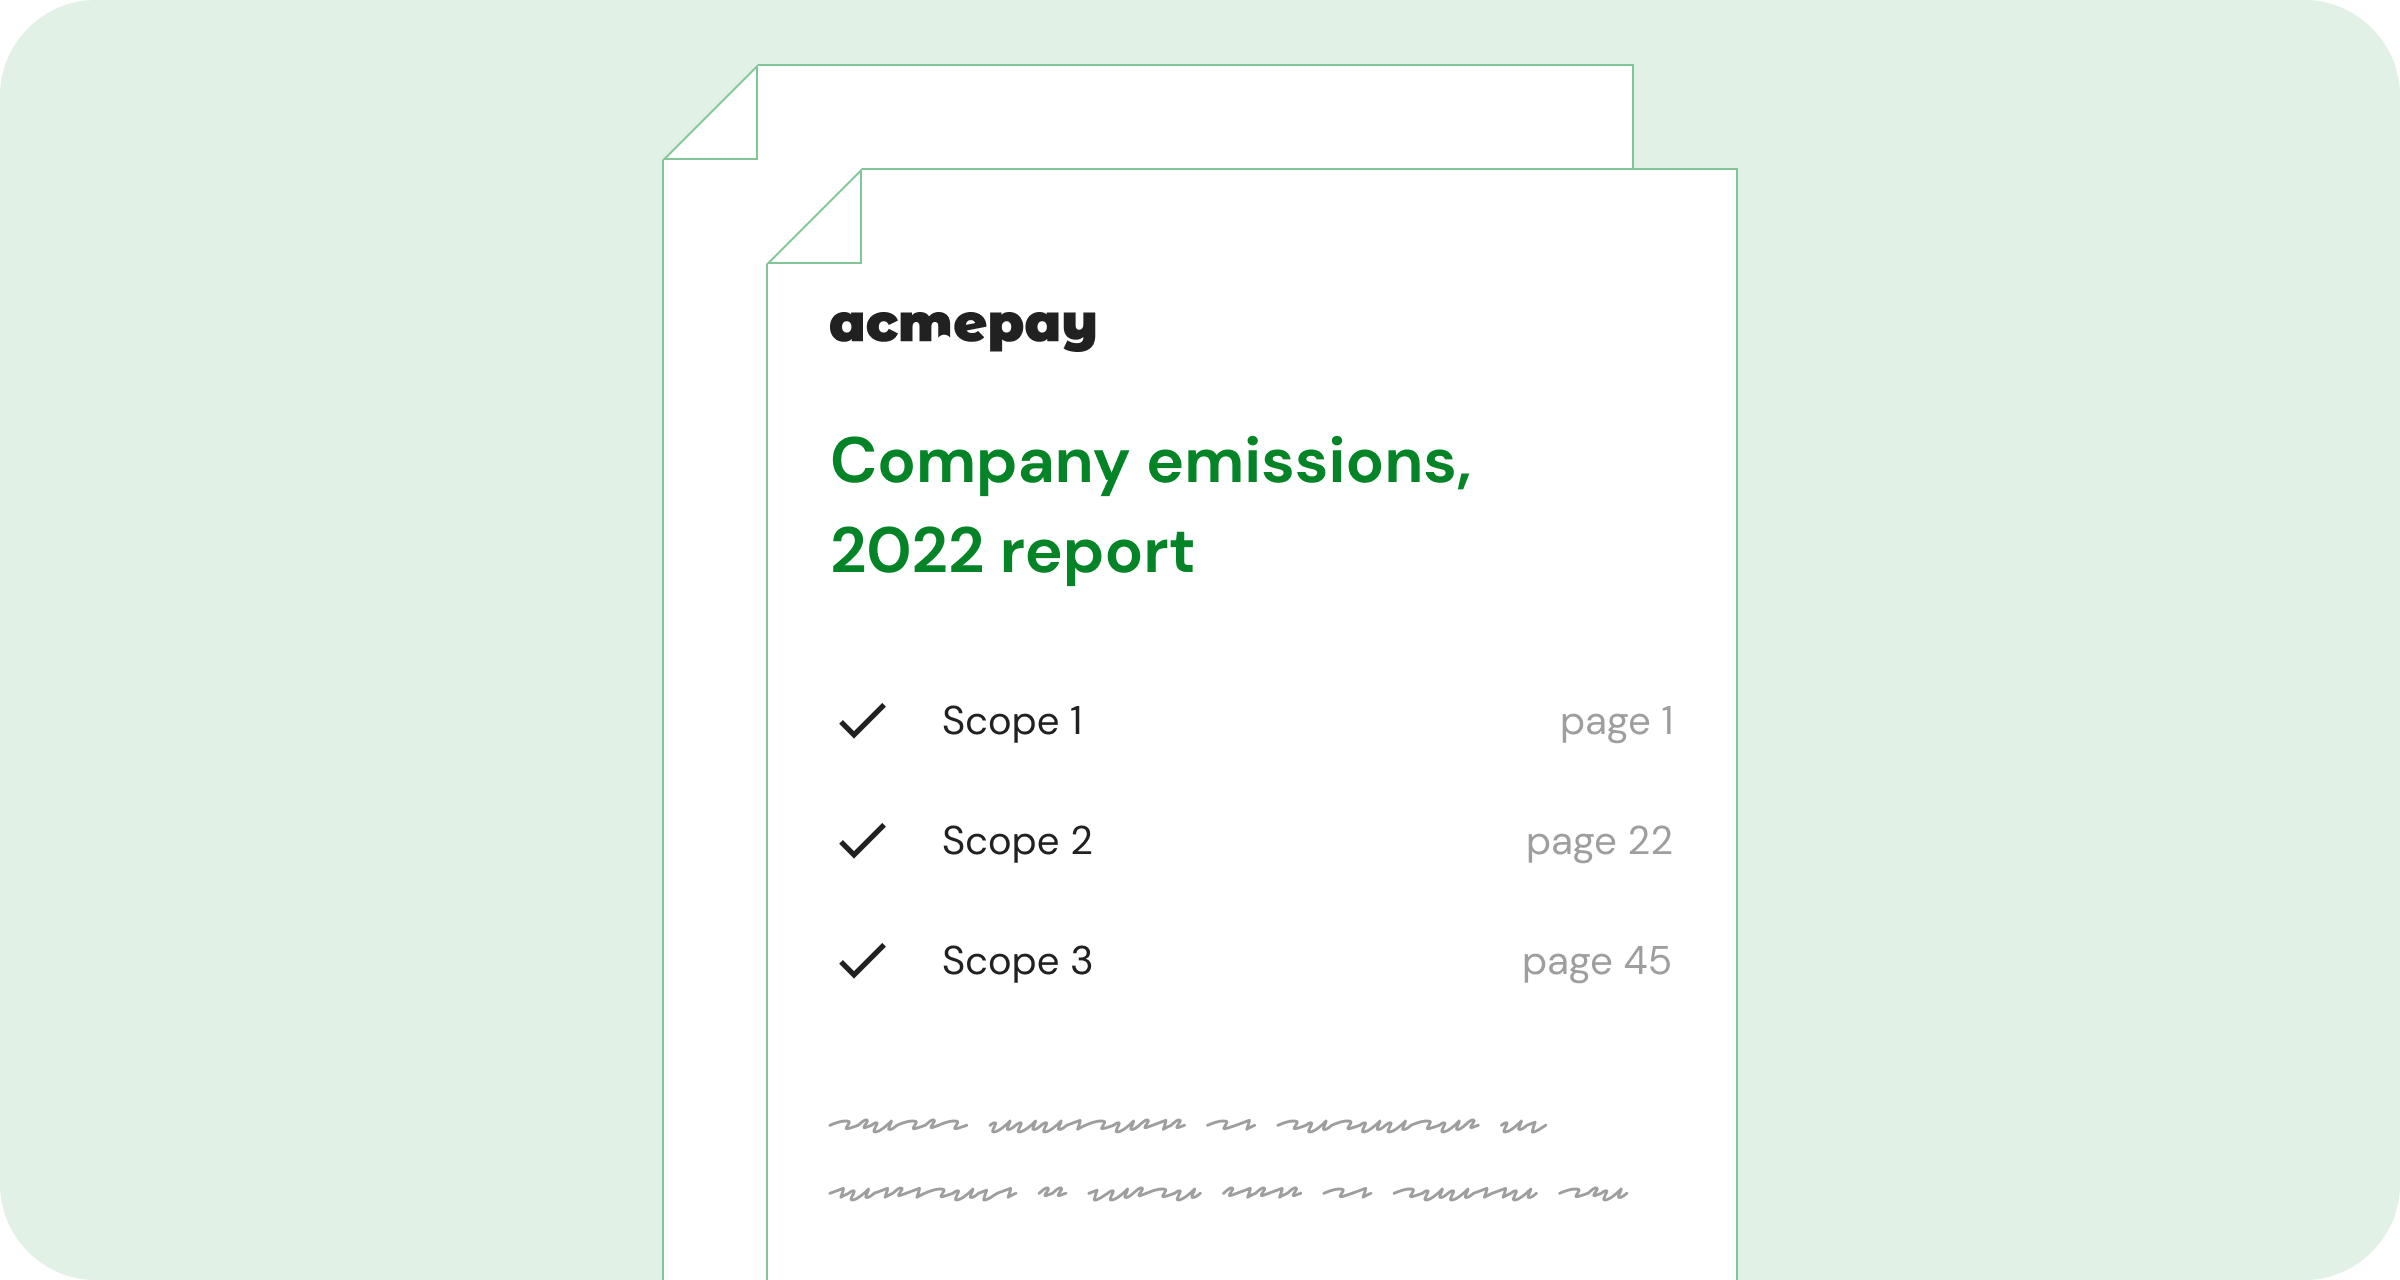 Company emissions report 2022, by acmepay